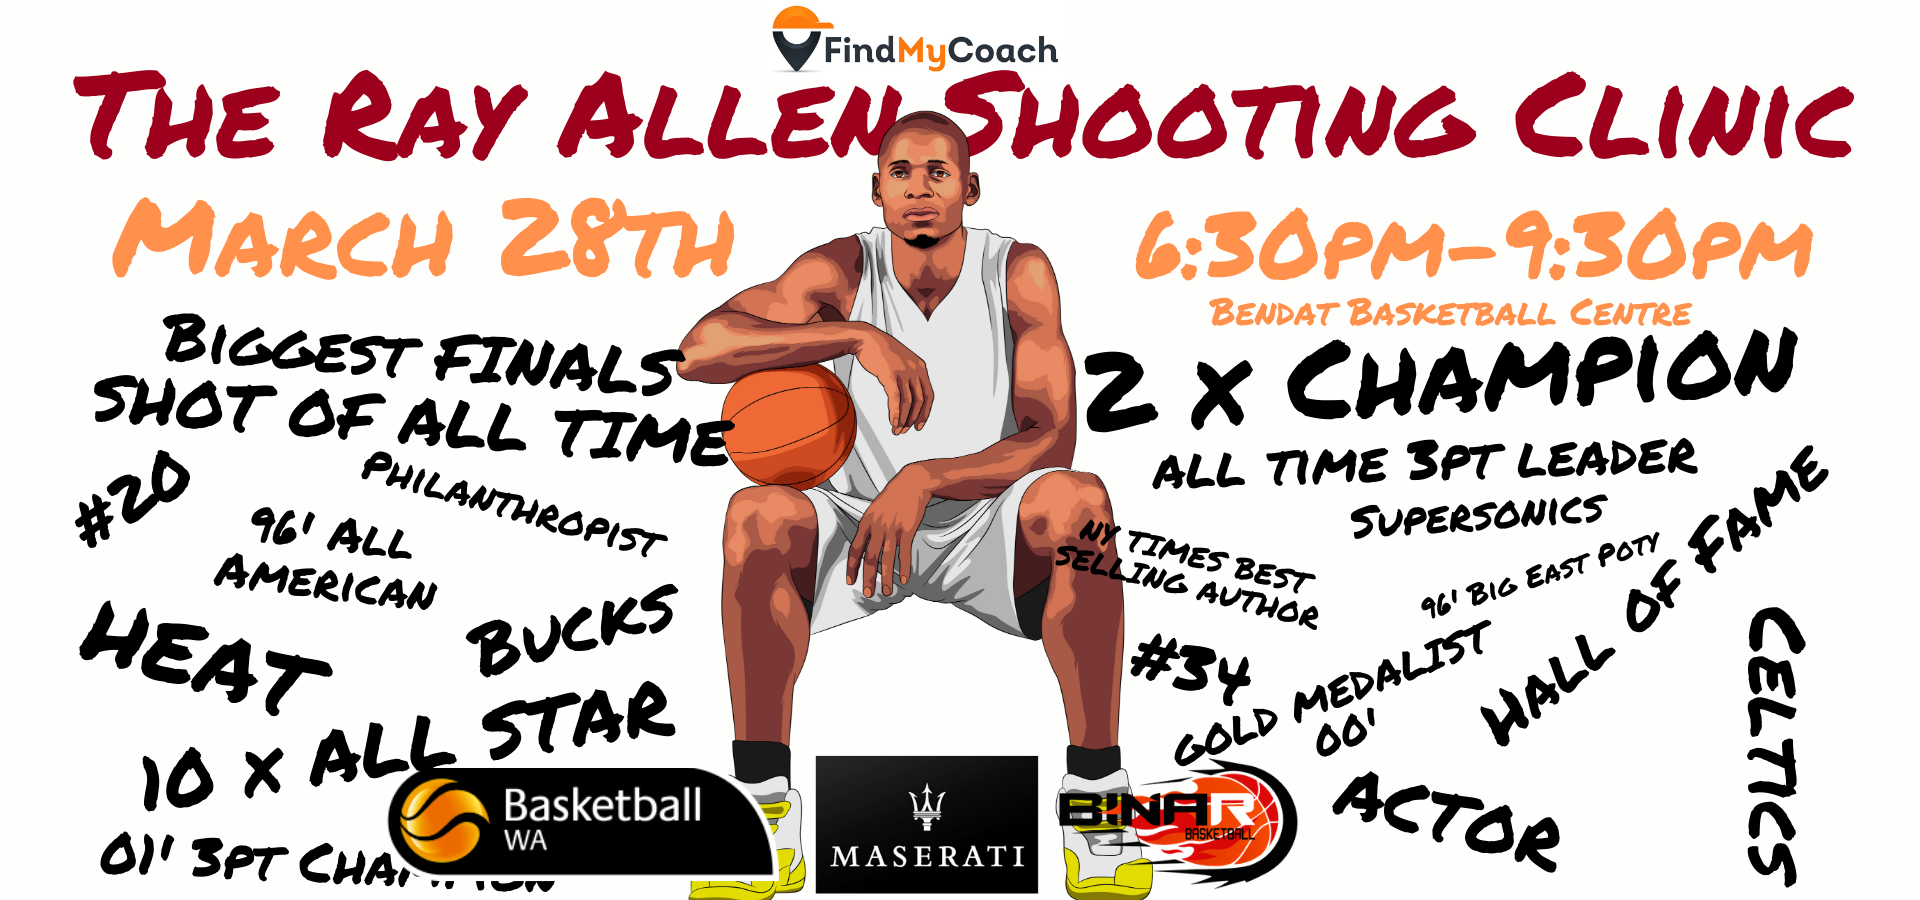 The Ray Allen Shooting Clinic - Perth